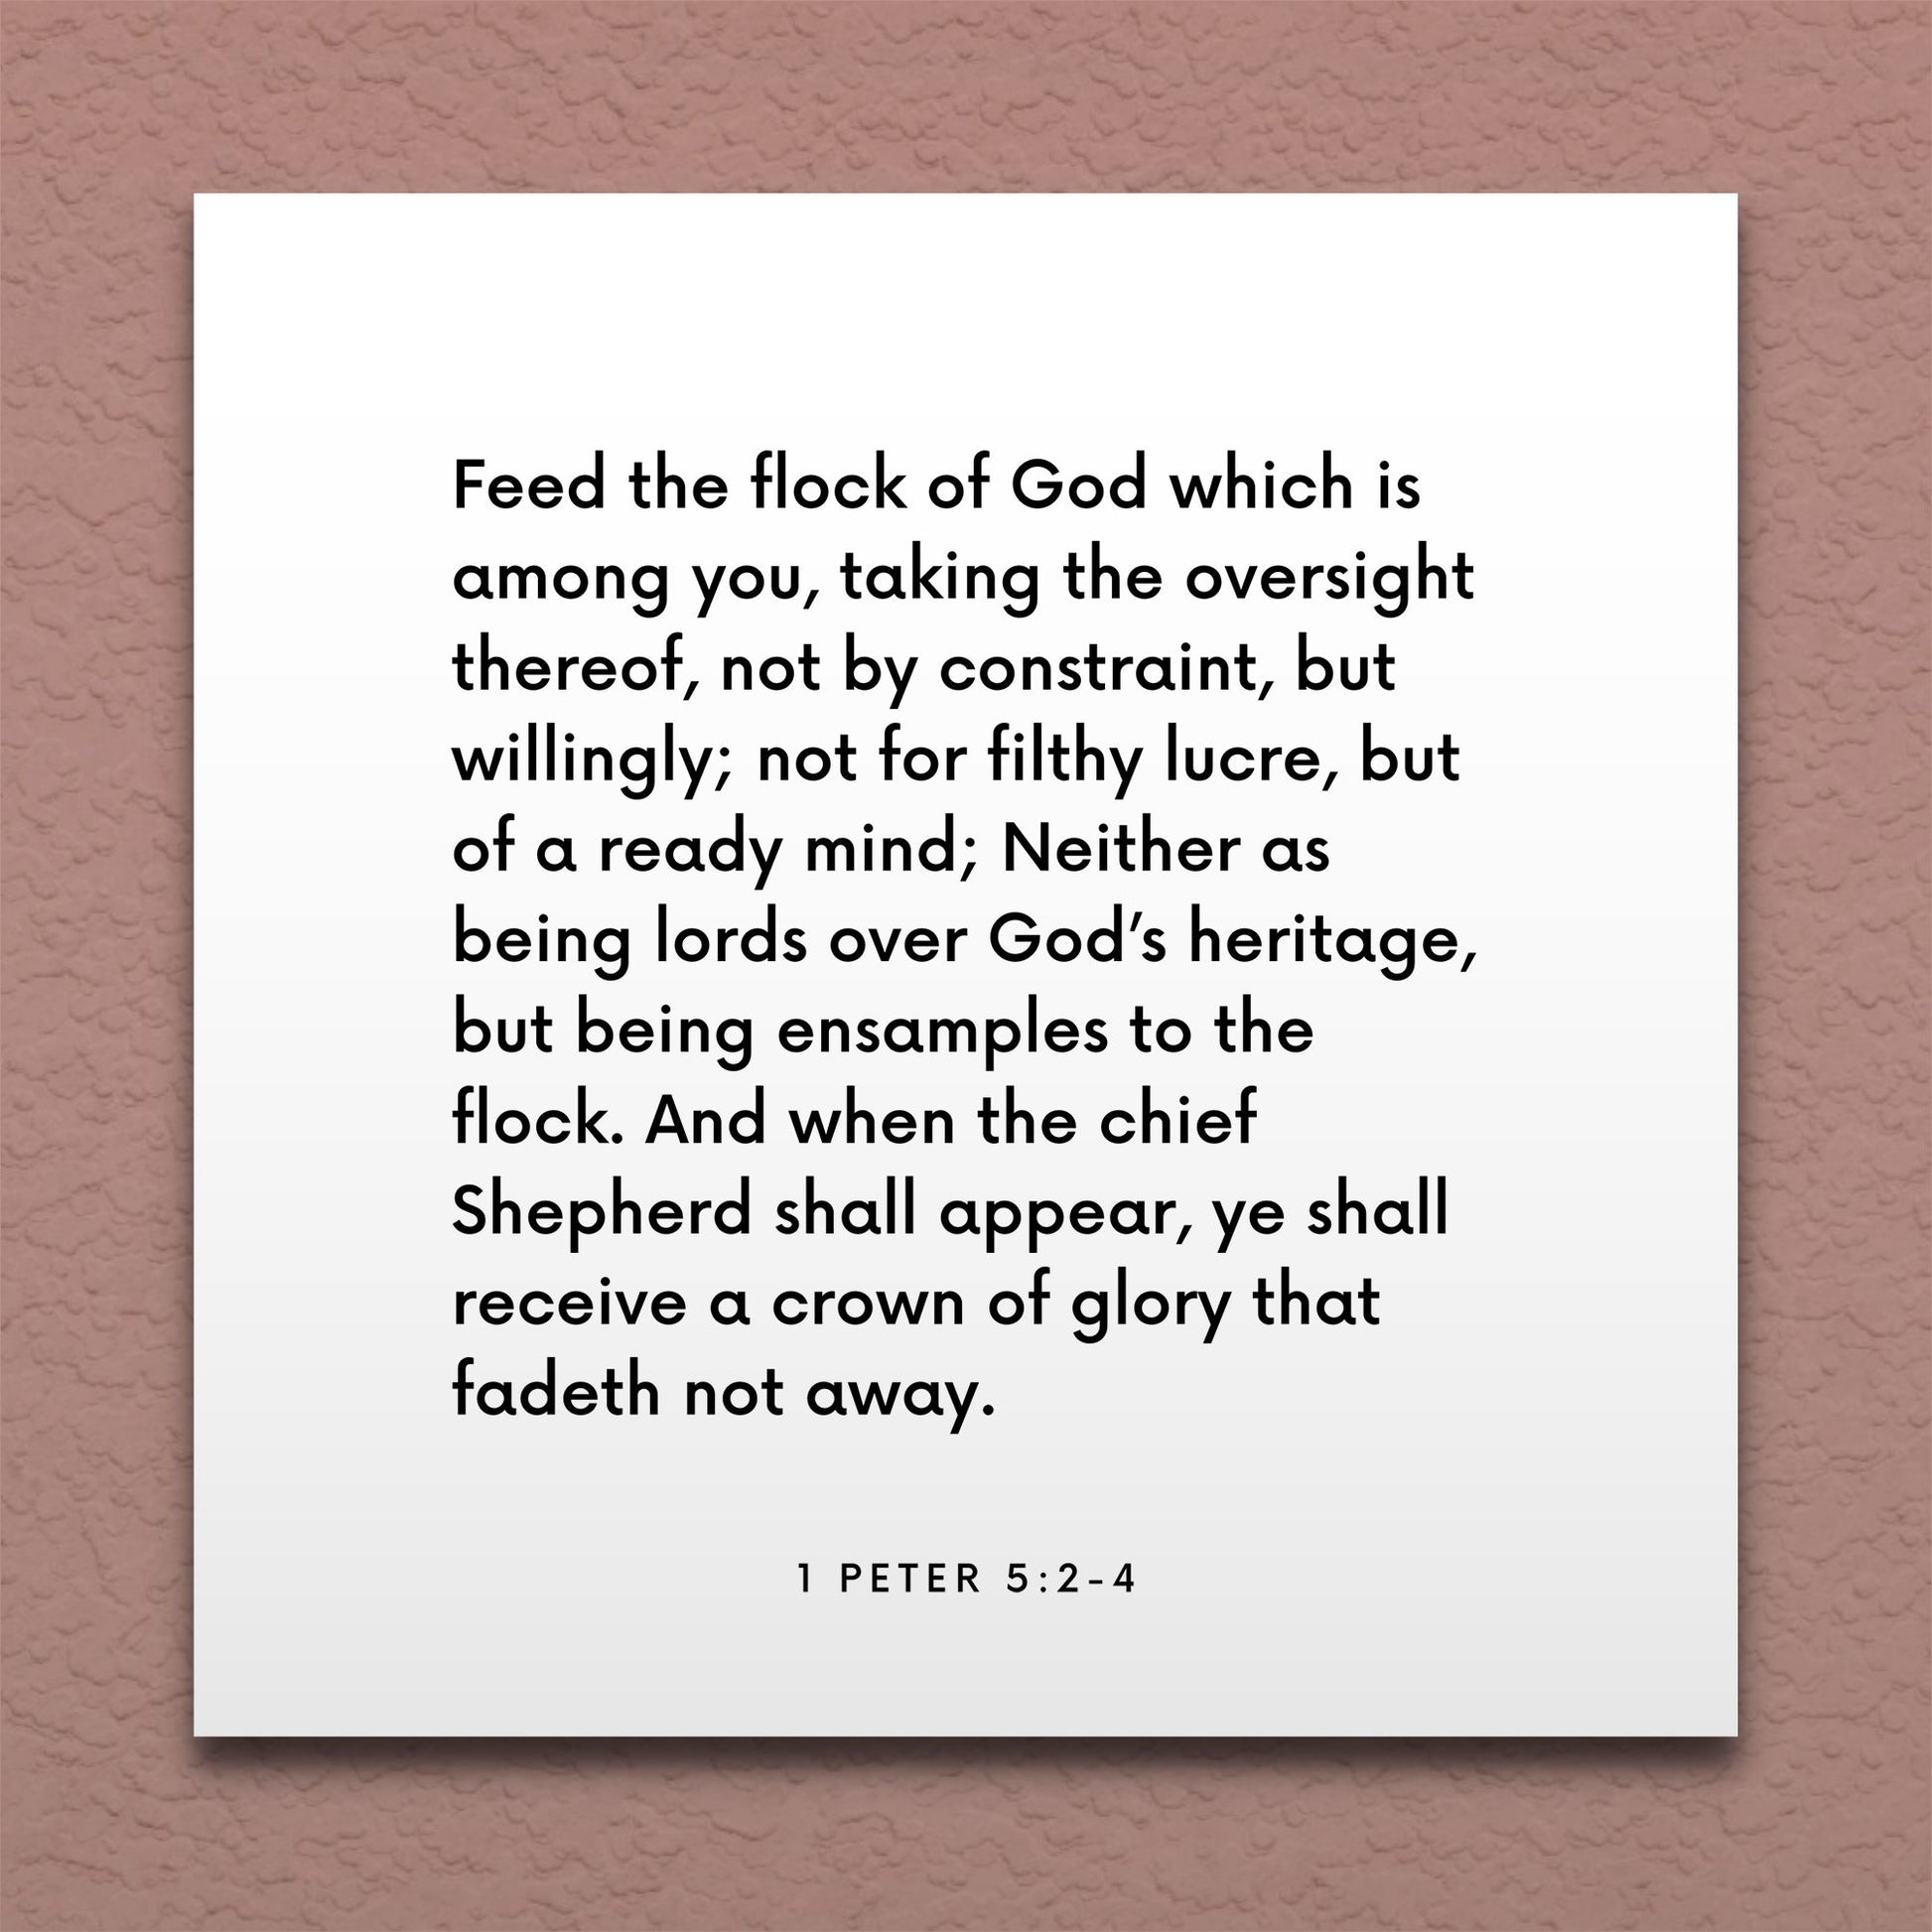 Wall-mounted scripture tile for 1 Peter 5:2-4 - "Feed the flock of God, taking the oversight thereof"